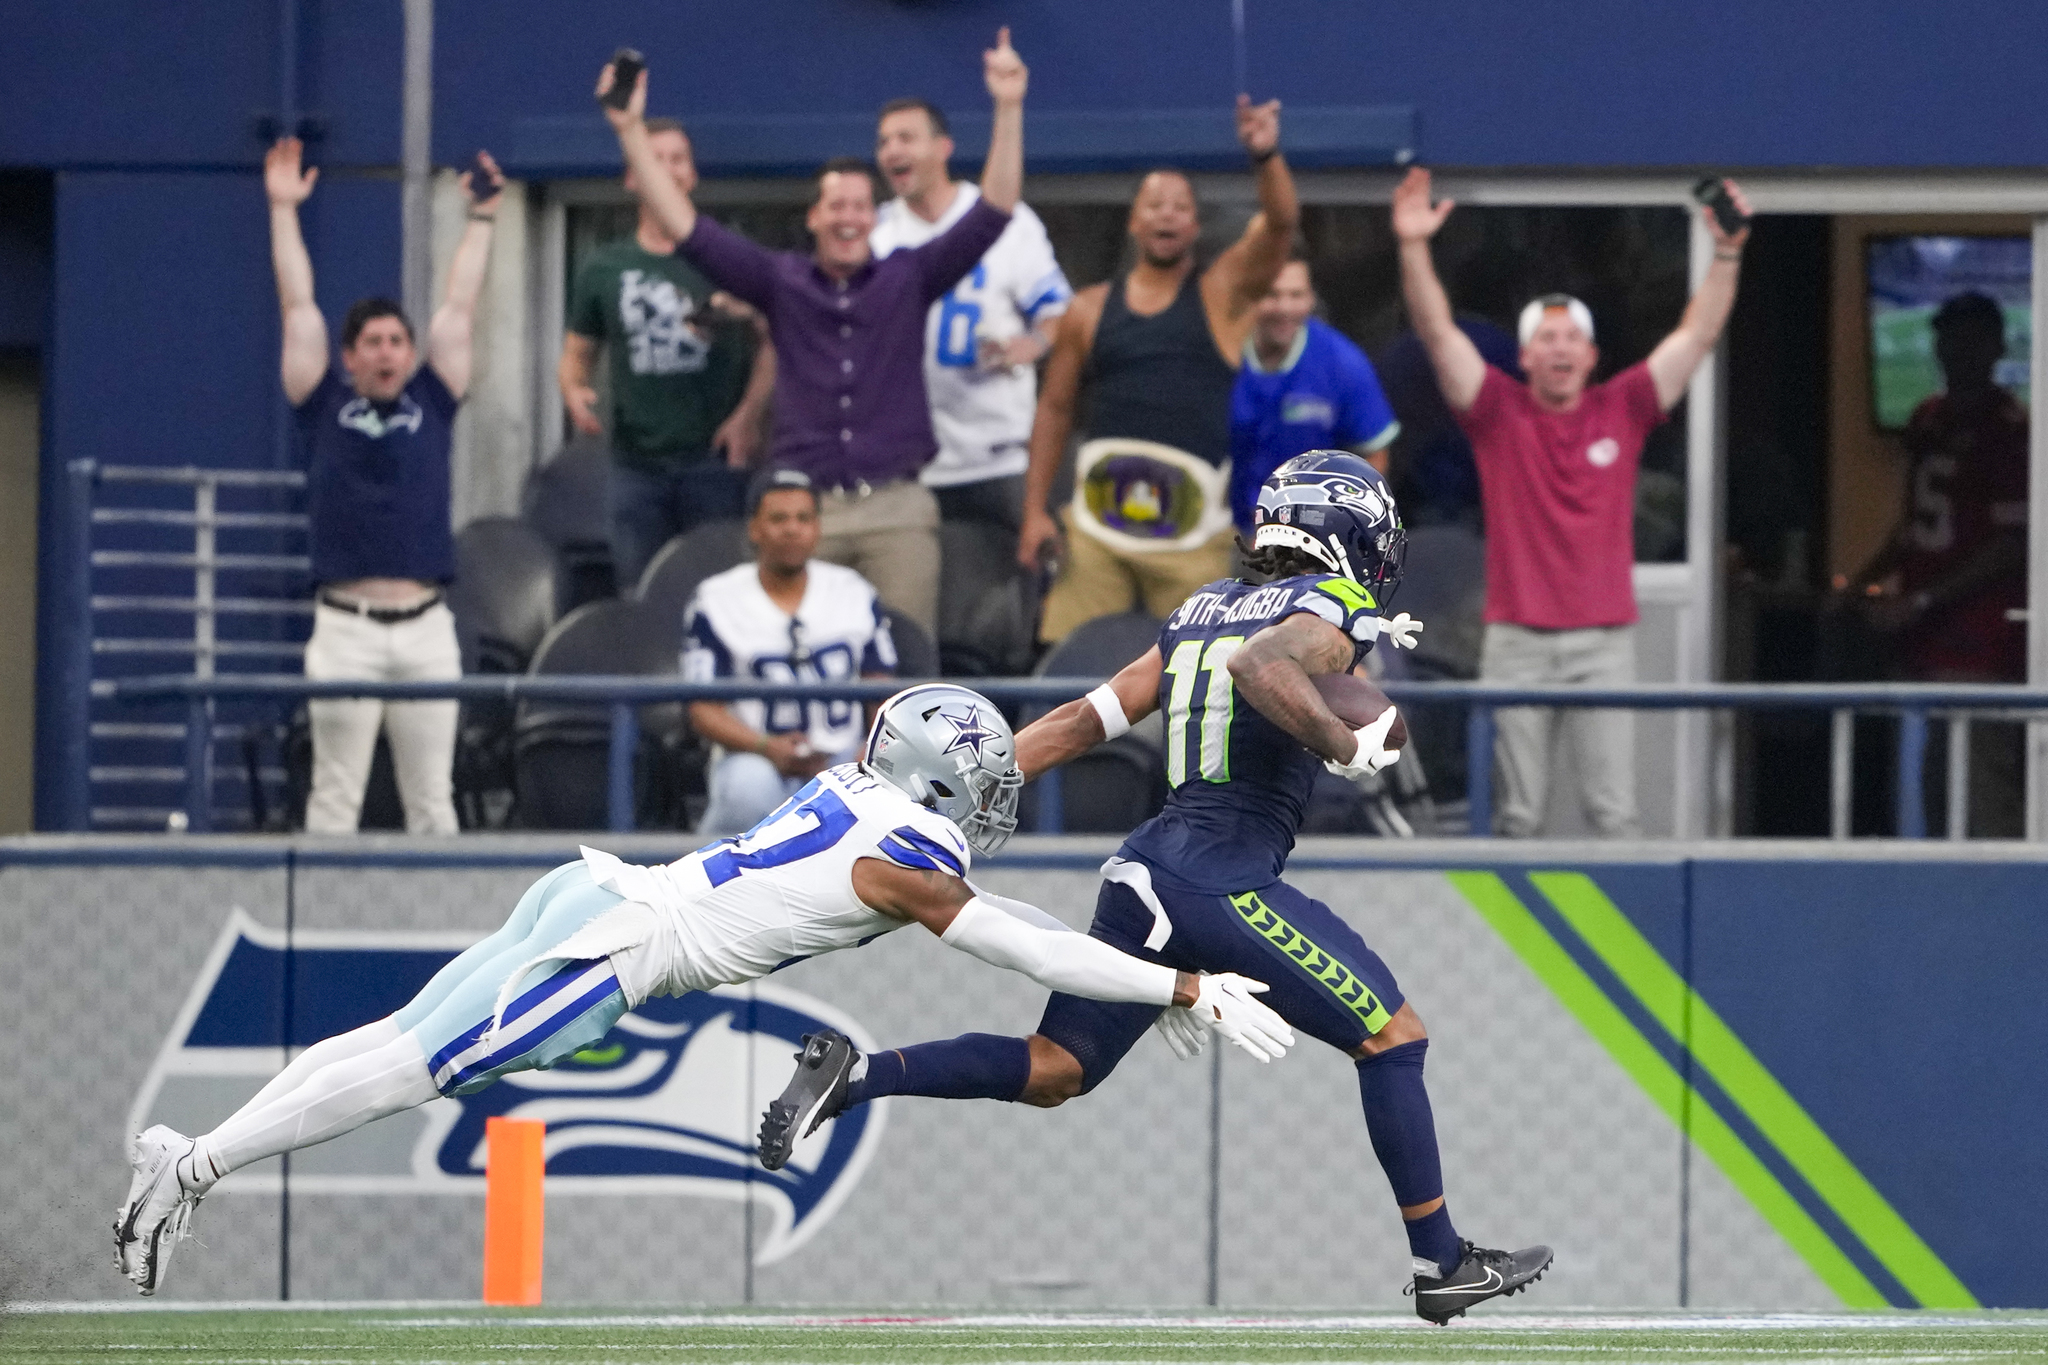 The Seahawks Jaxon Smith-Njigba (WR) will be one of the most sough out rookies in Fantasy Football for 2023.